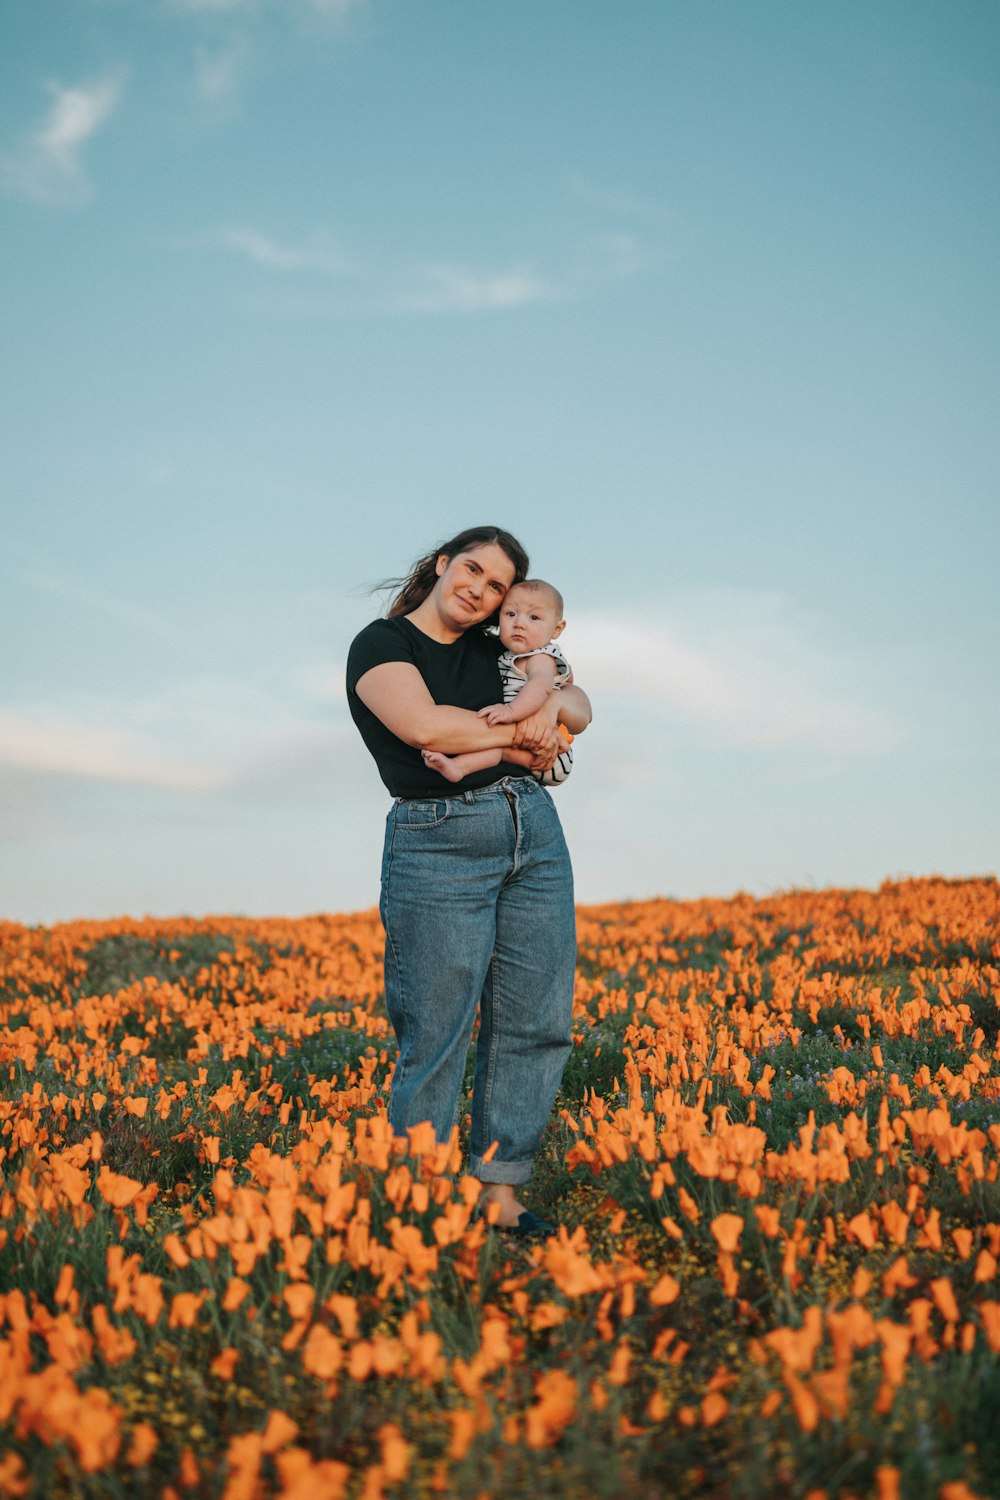 woman in black shirt and blue denim jeans carrying baby in black shirt on yellow flower